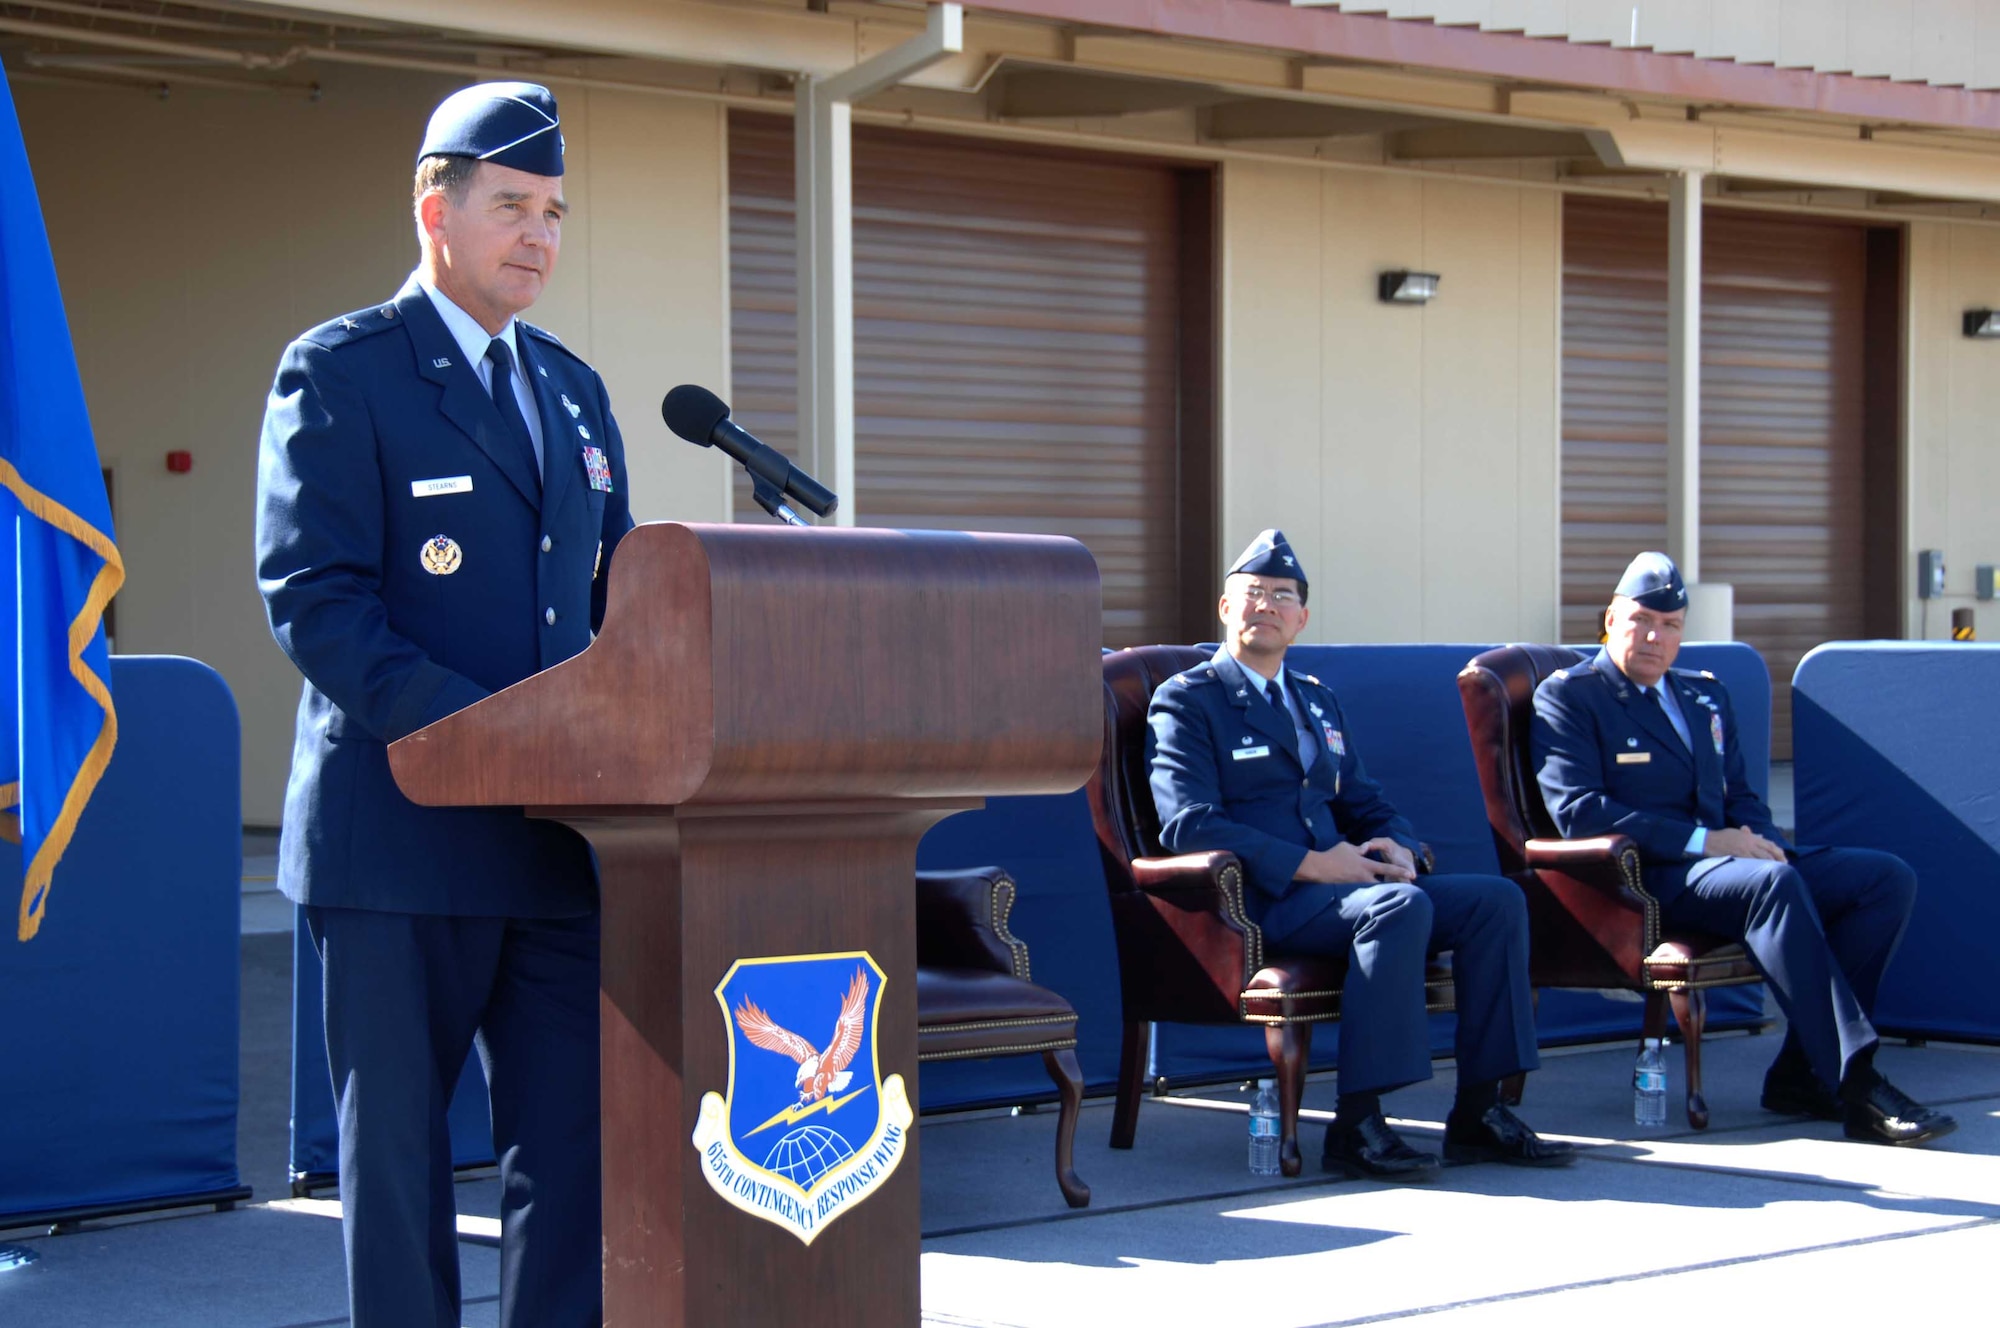 Brig. Gen. Mark Stearns, 15th Expeditionary Mobility Task Force commander, speaks during the 615th Contingecy Response Wing change-of-command ceremony Sept. 23. Col. Tony Hinen relinquished command to Col. John Lipinski. (U.S. Air Force photo/Nan Wylie)